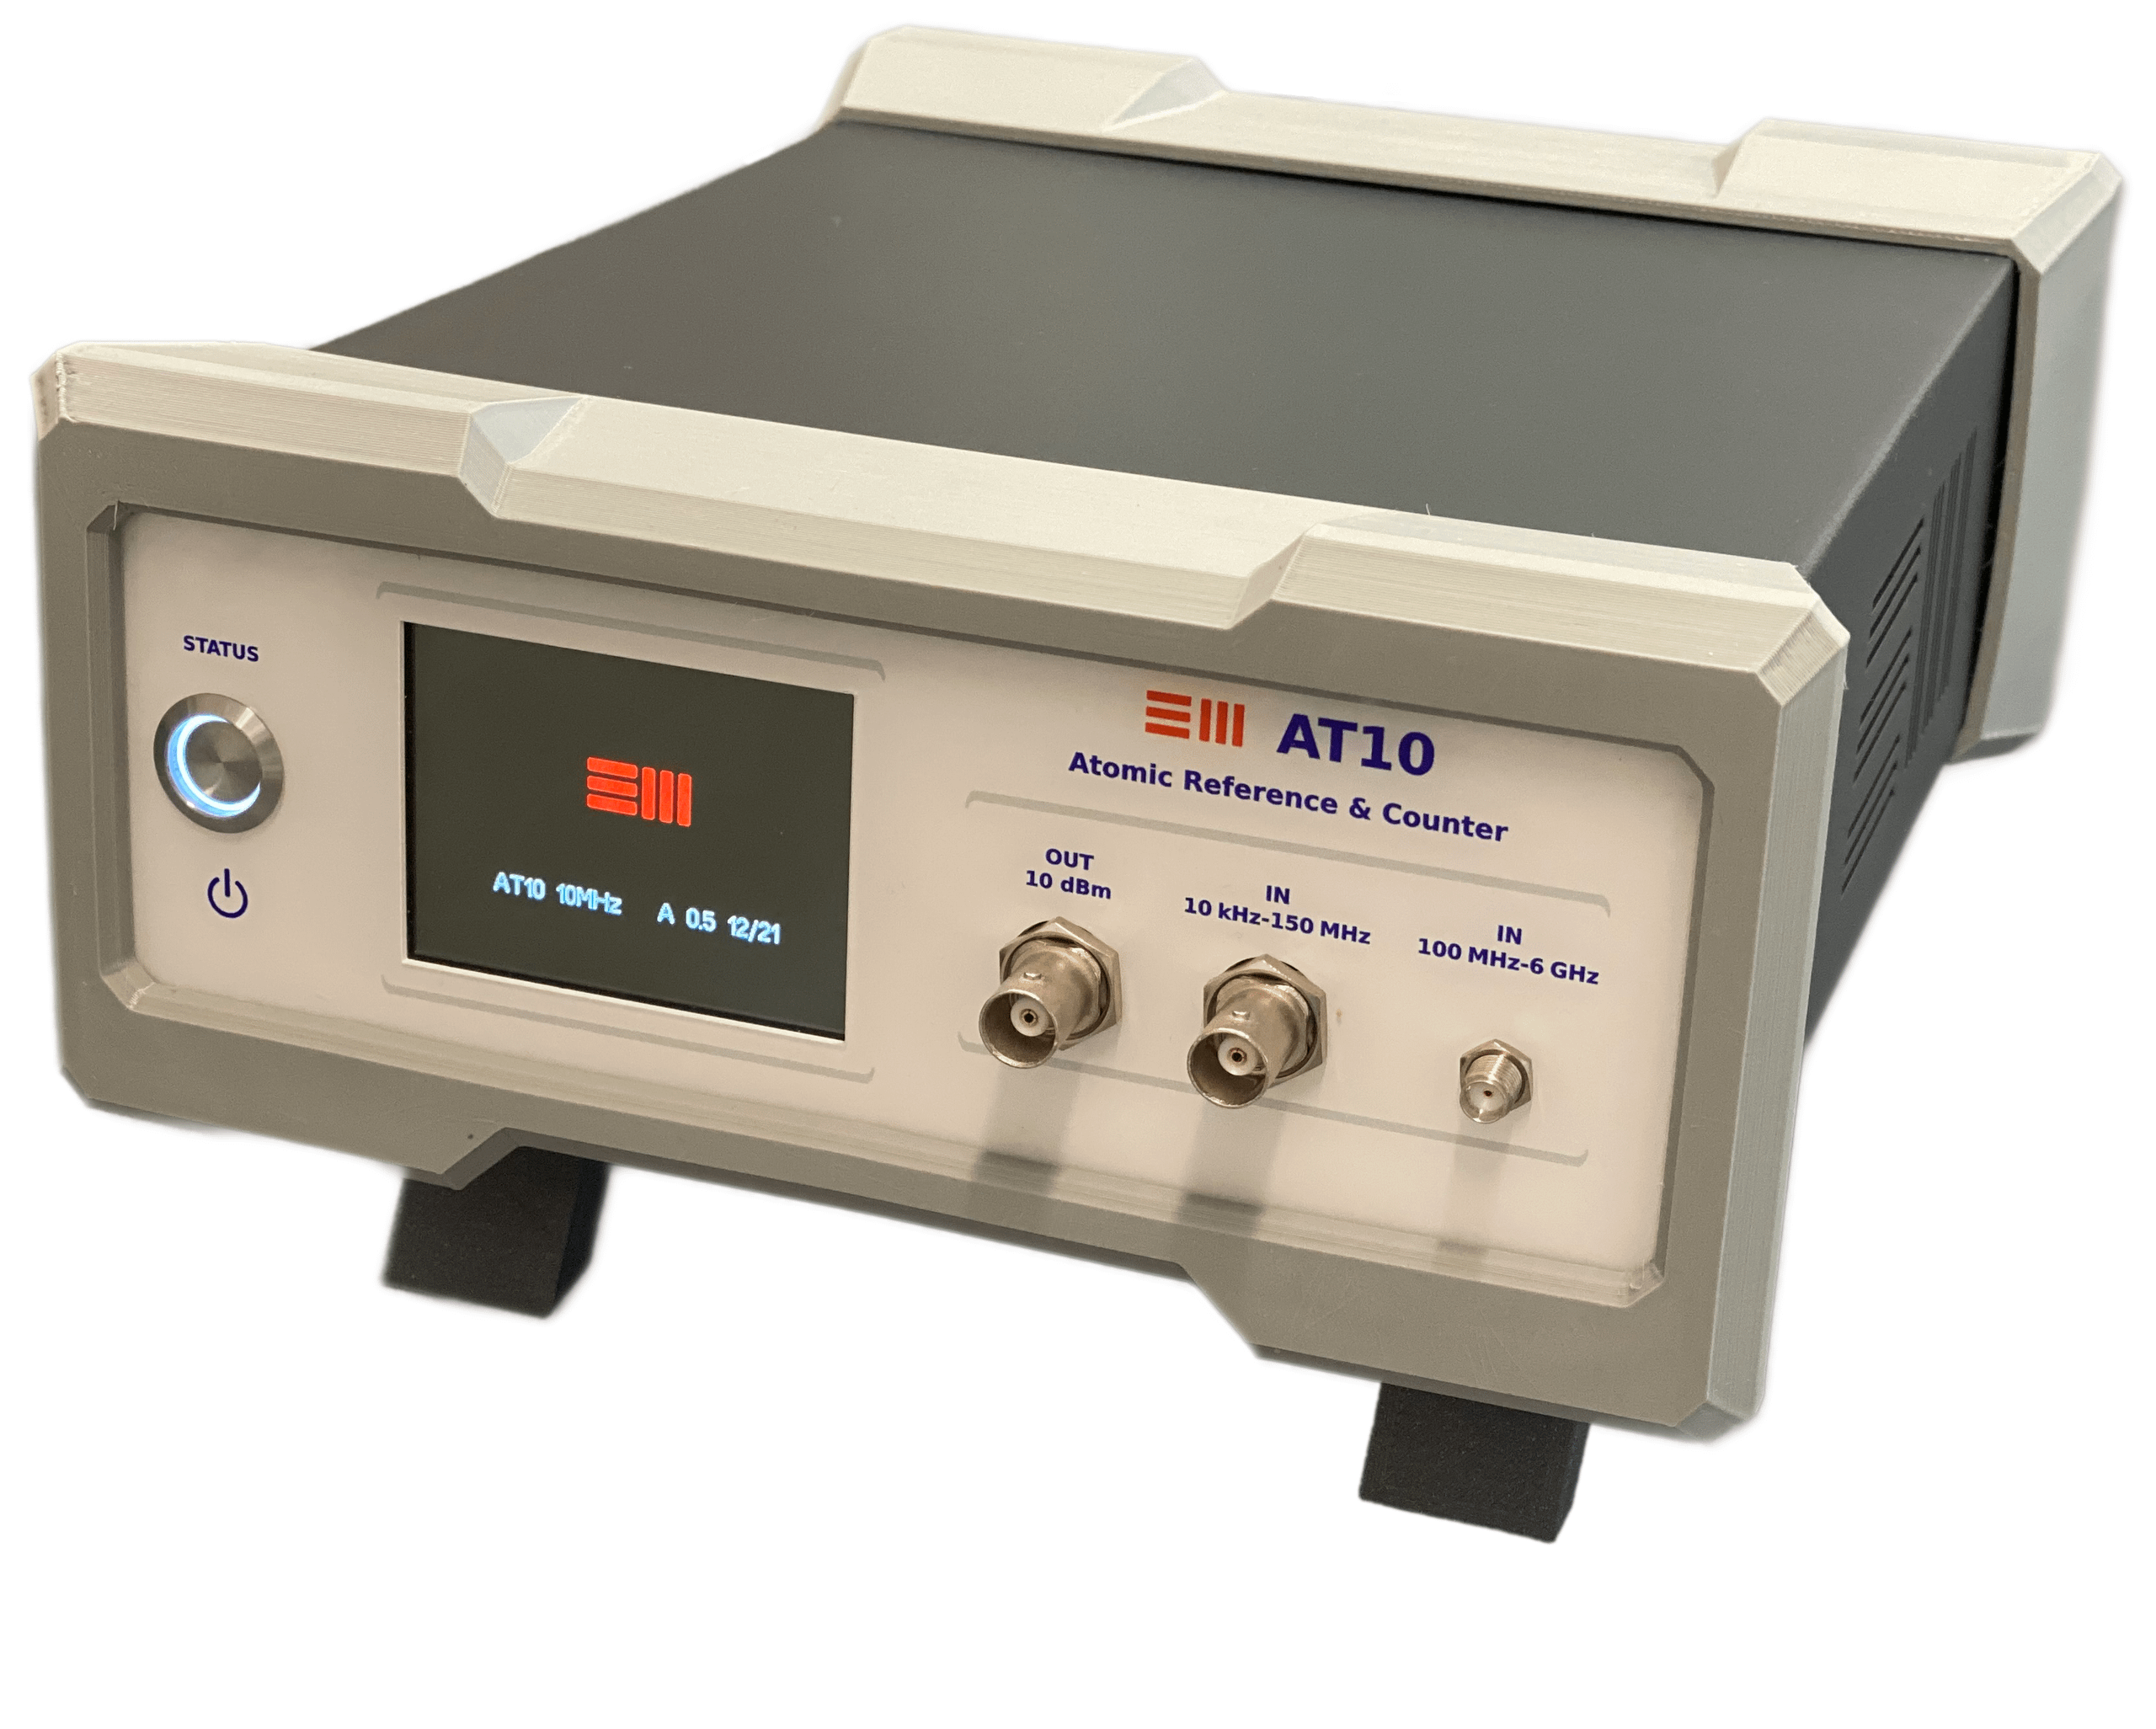 AT10 Atomic Reference and Counter - High-precision and high-accuracy atomic rubidium frequency reference and frequency counter